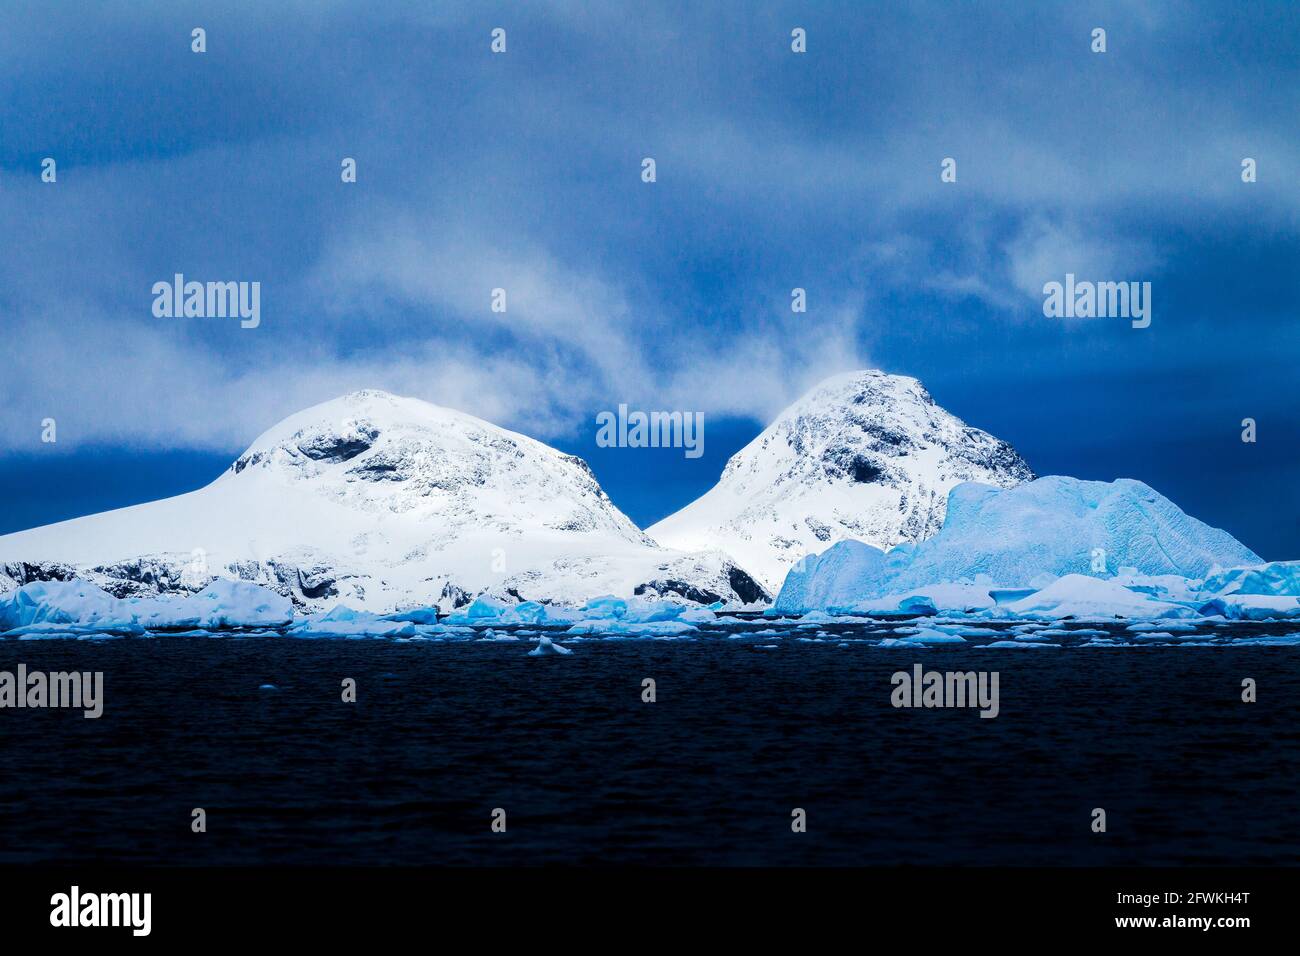 Drifting clouds and snowy mountains, Antarctica. Stock Photo